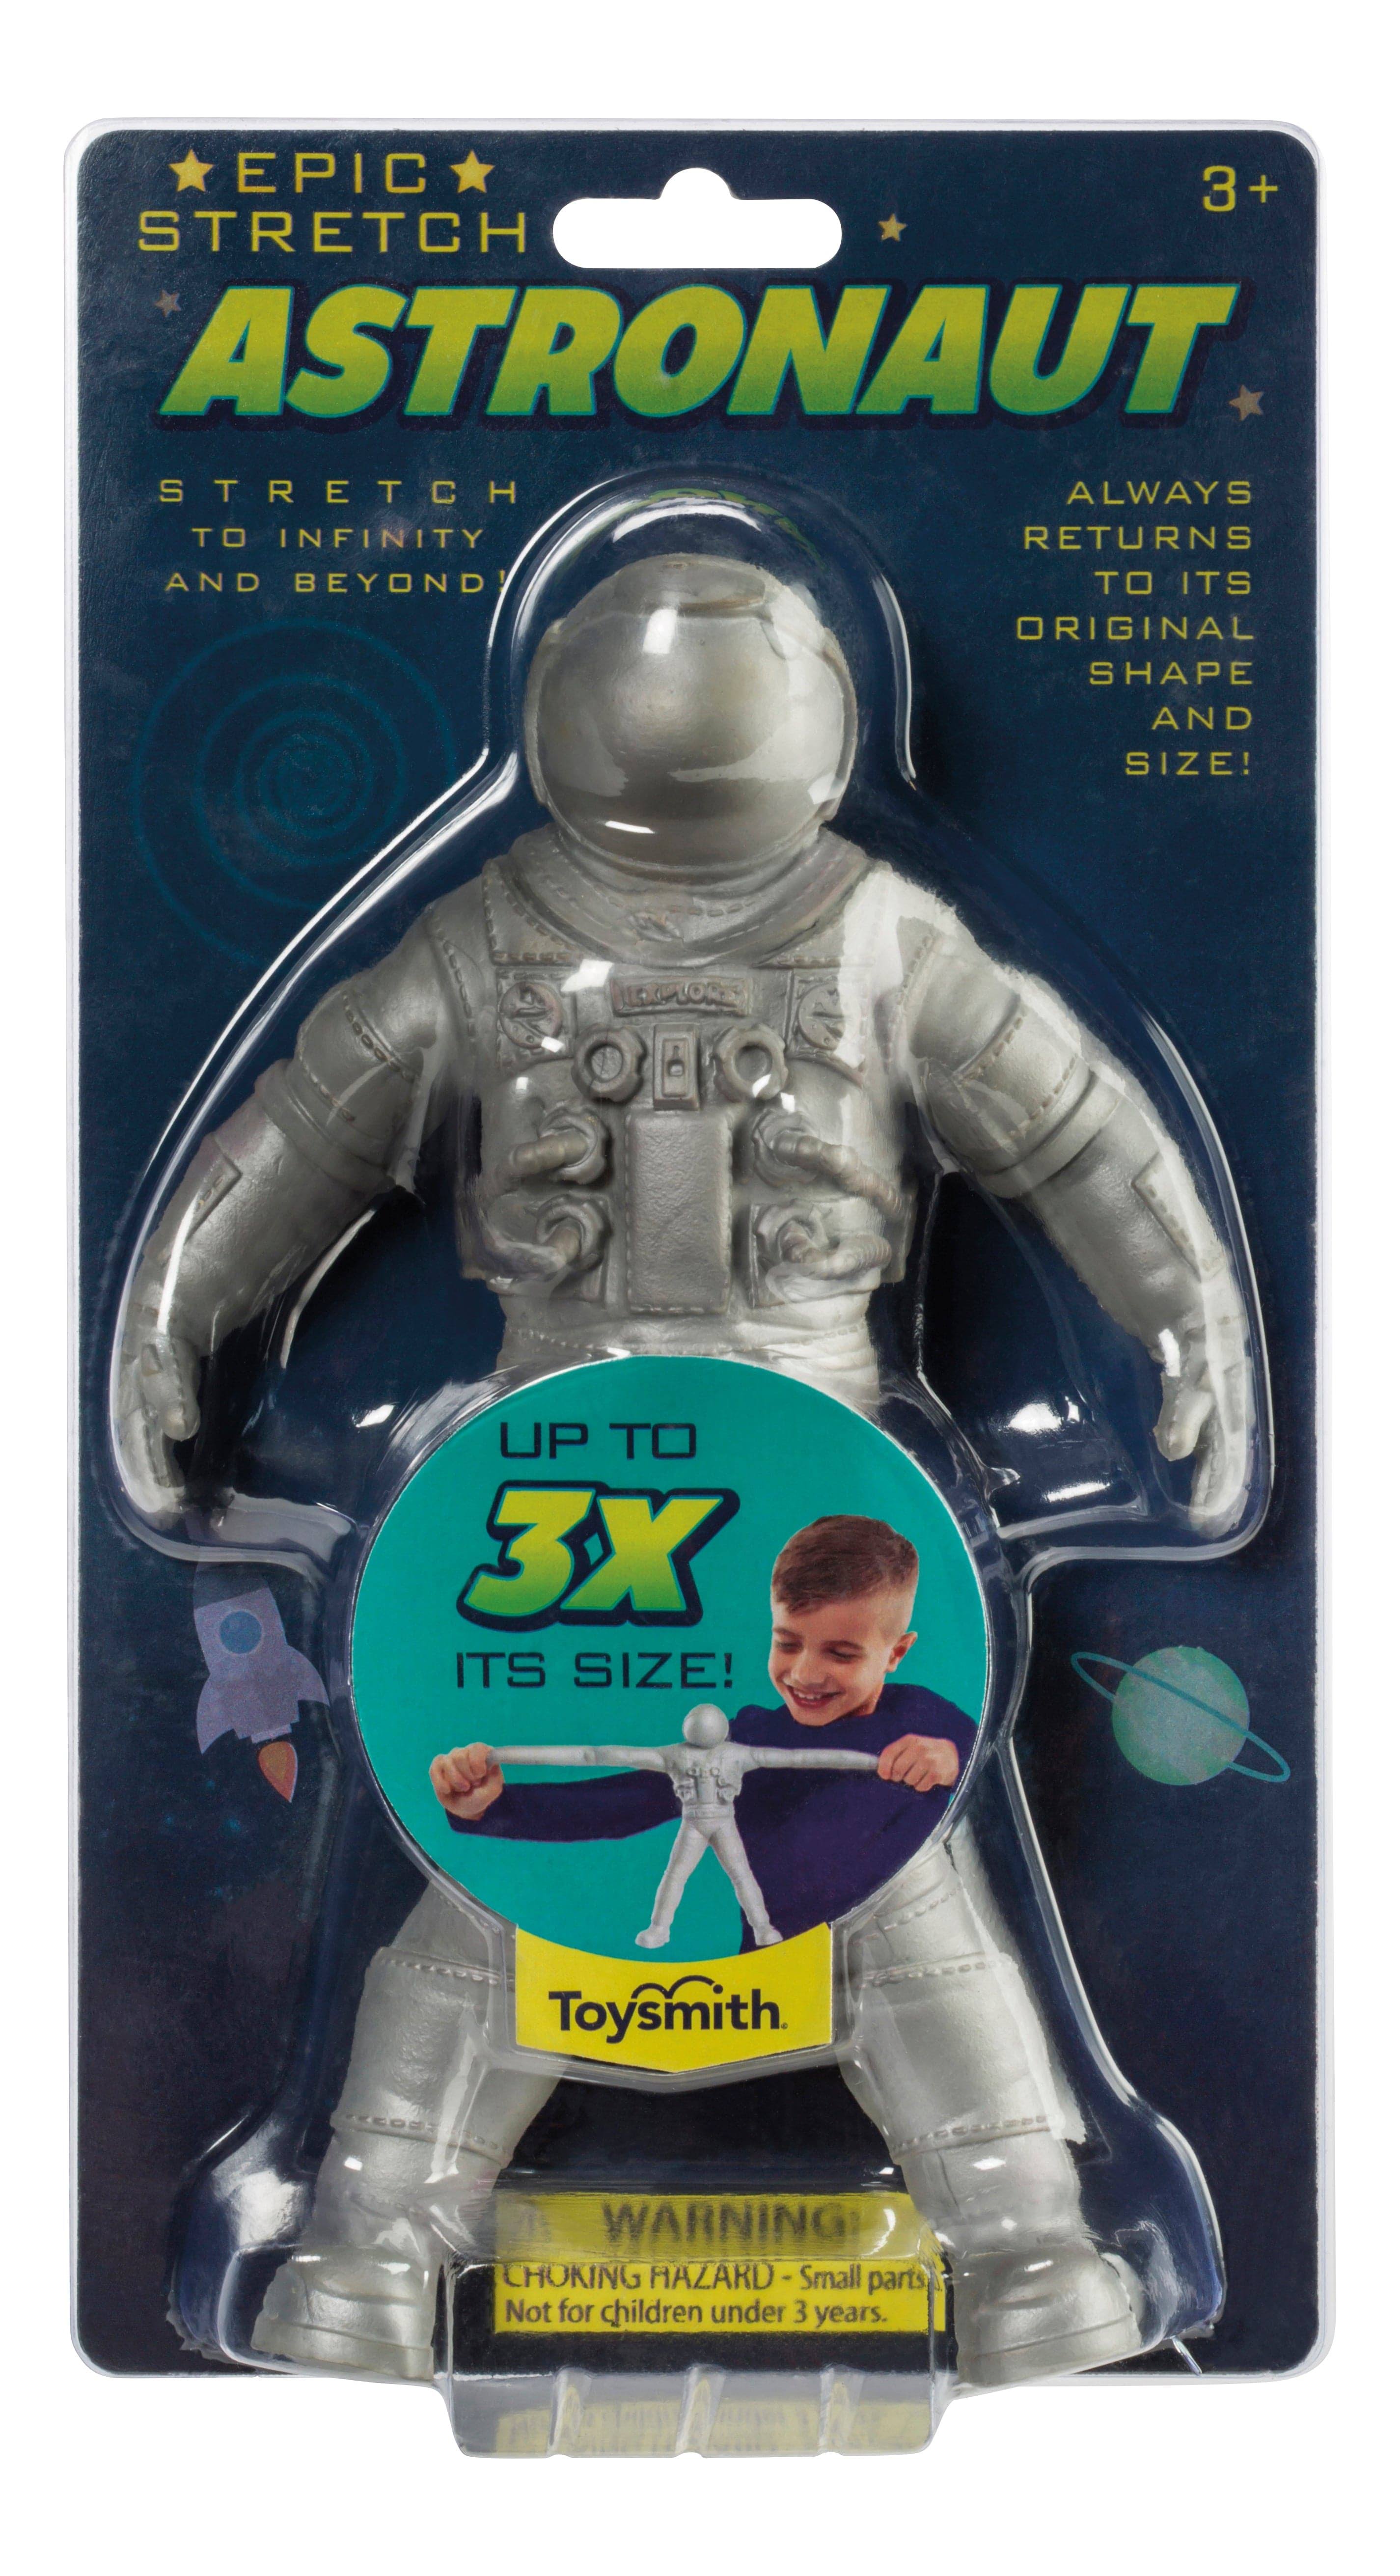 Toysmith Epic Stretch Astronaut, Stretches Up to 24 Inches - For Boys